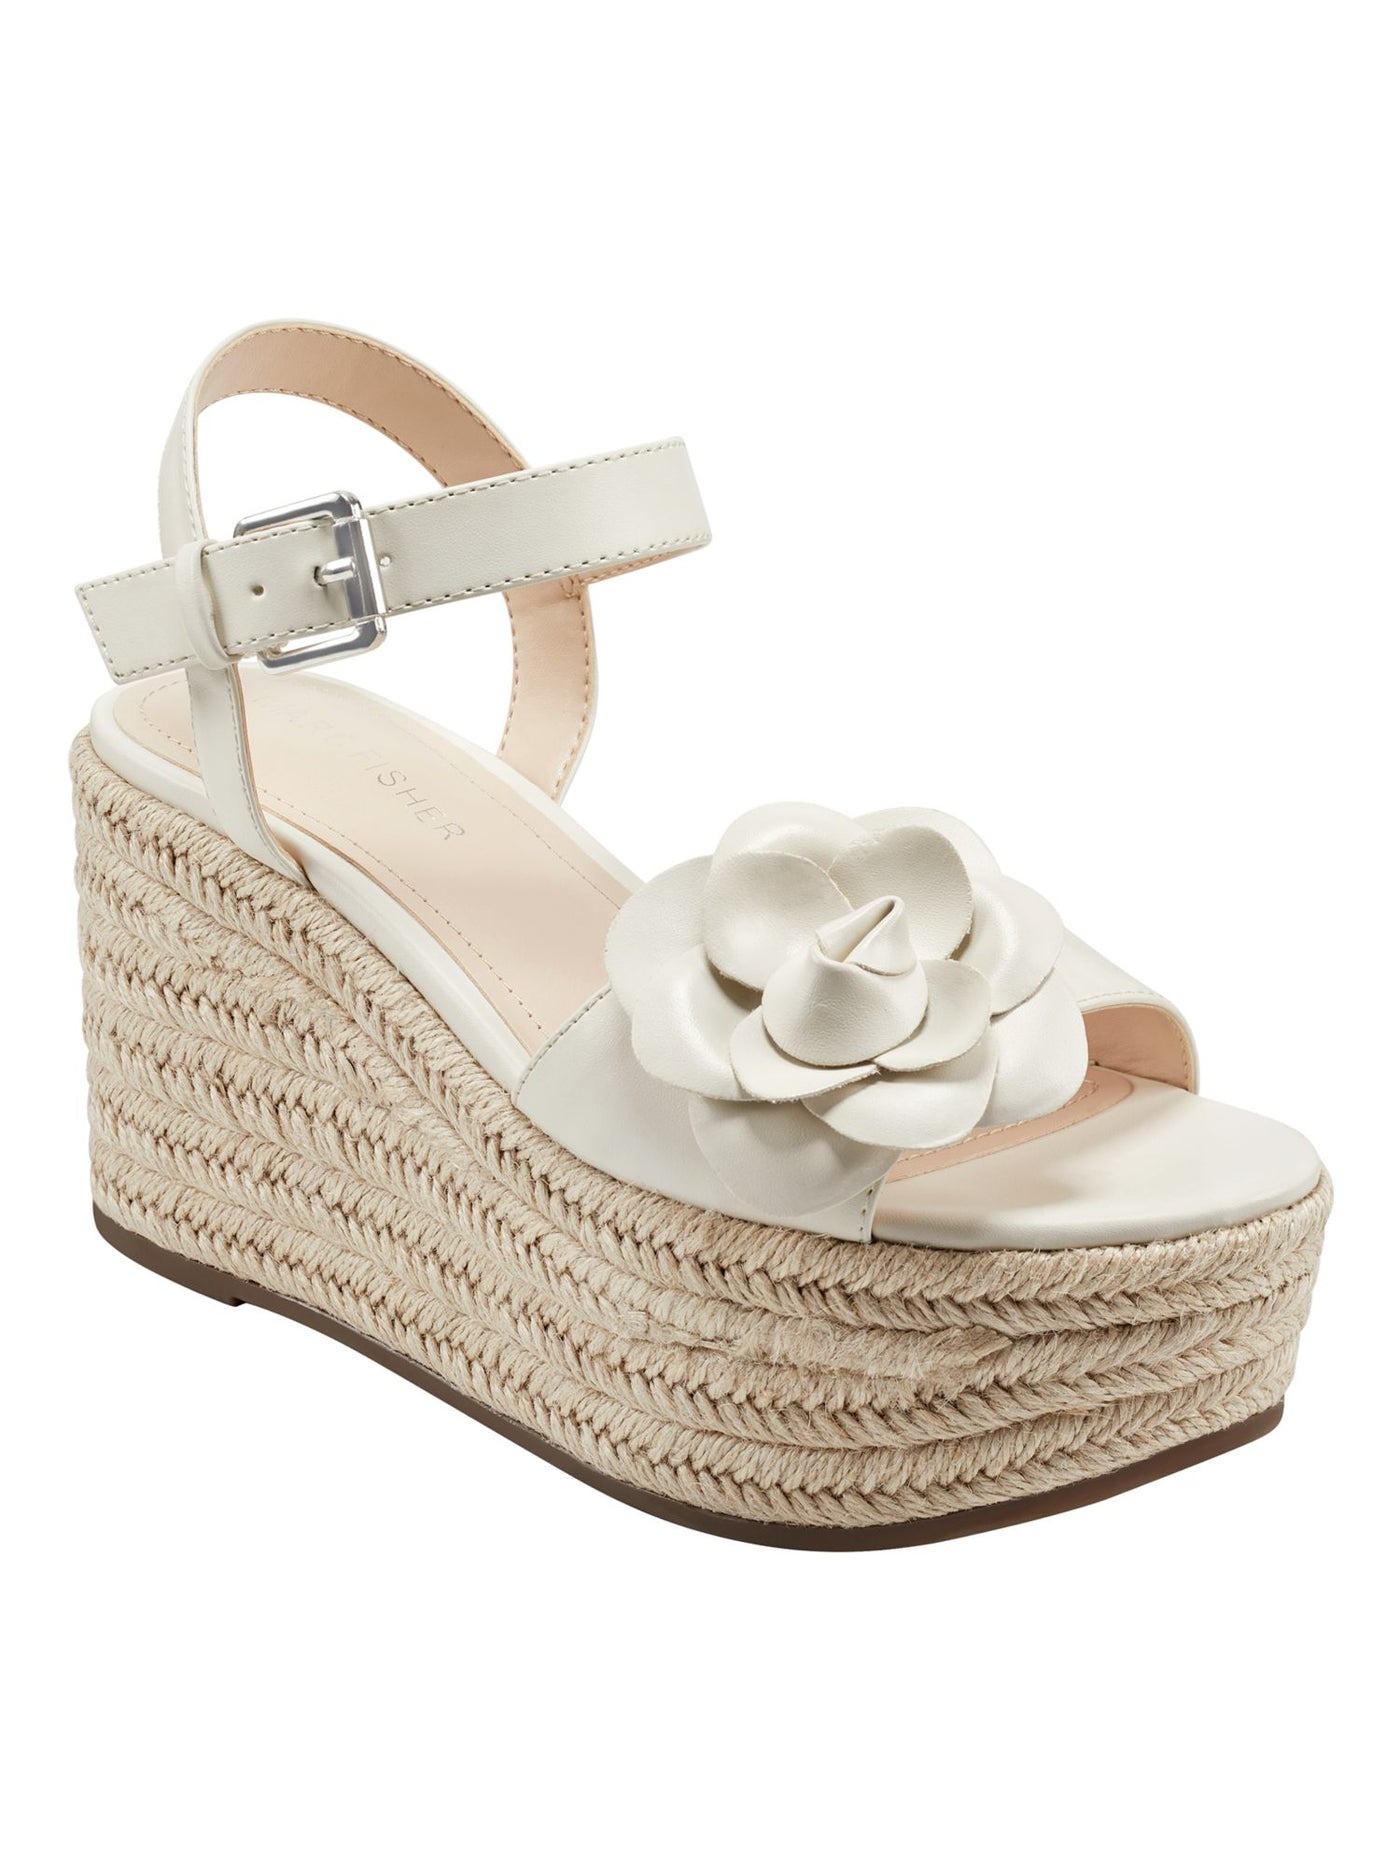 MARC FISHER Womens Ivory Padded Woven Flower Adjustable Strap Ankle Strap Venom Almond Toe Wedge Buckle Espadrille Shoes 8.5 M